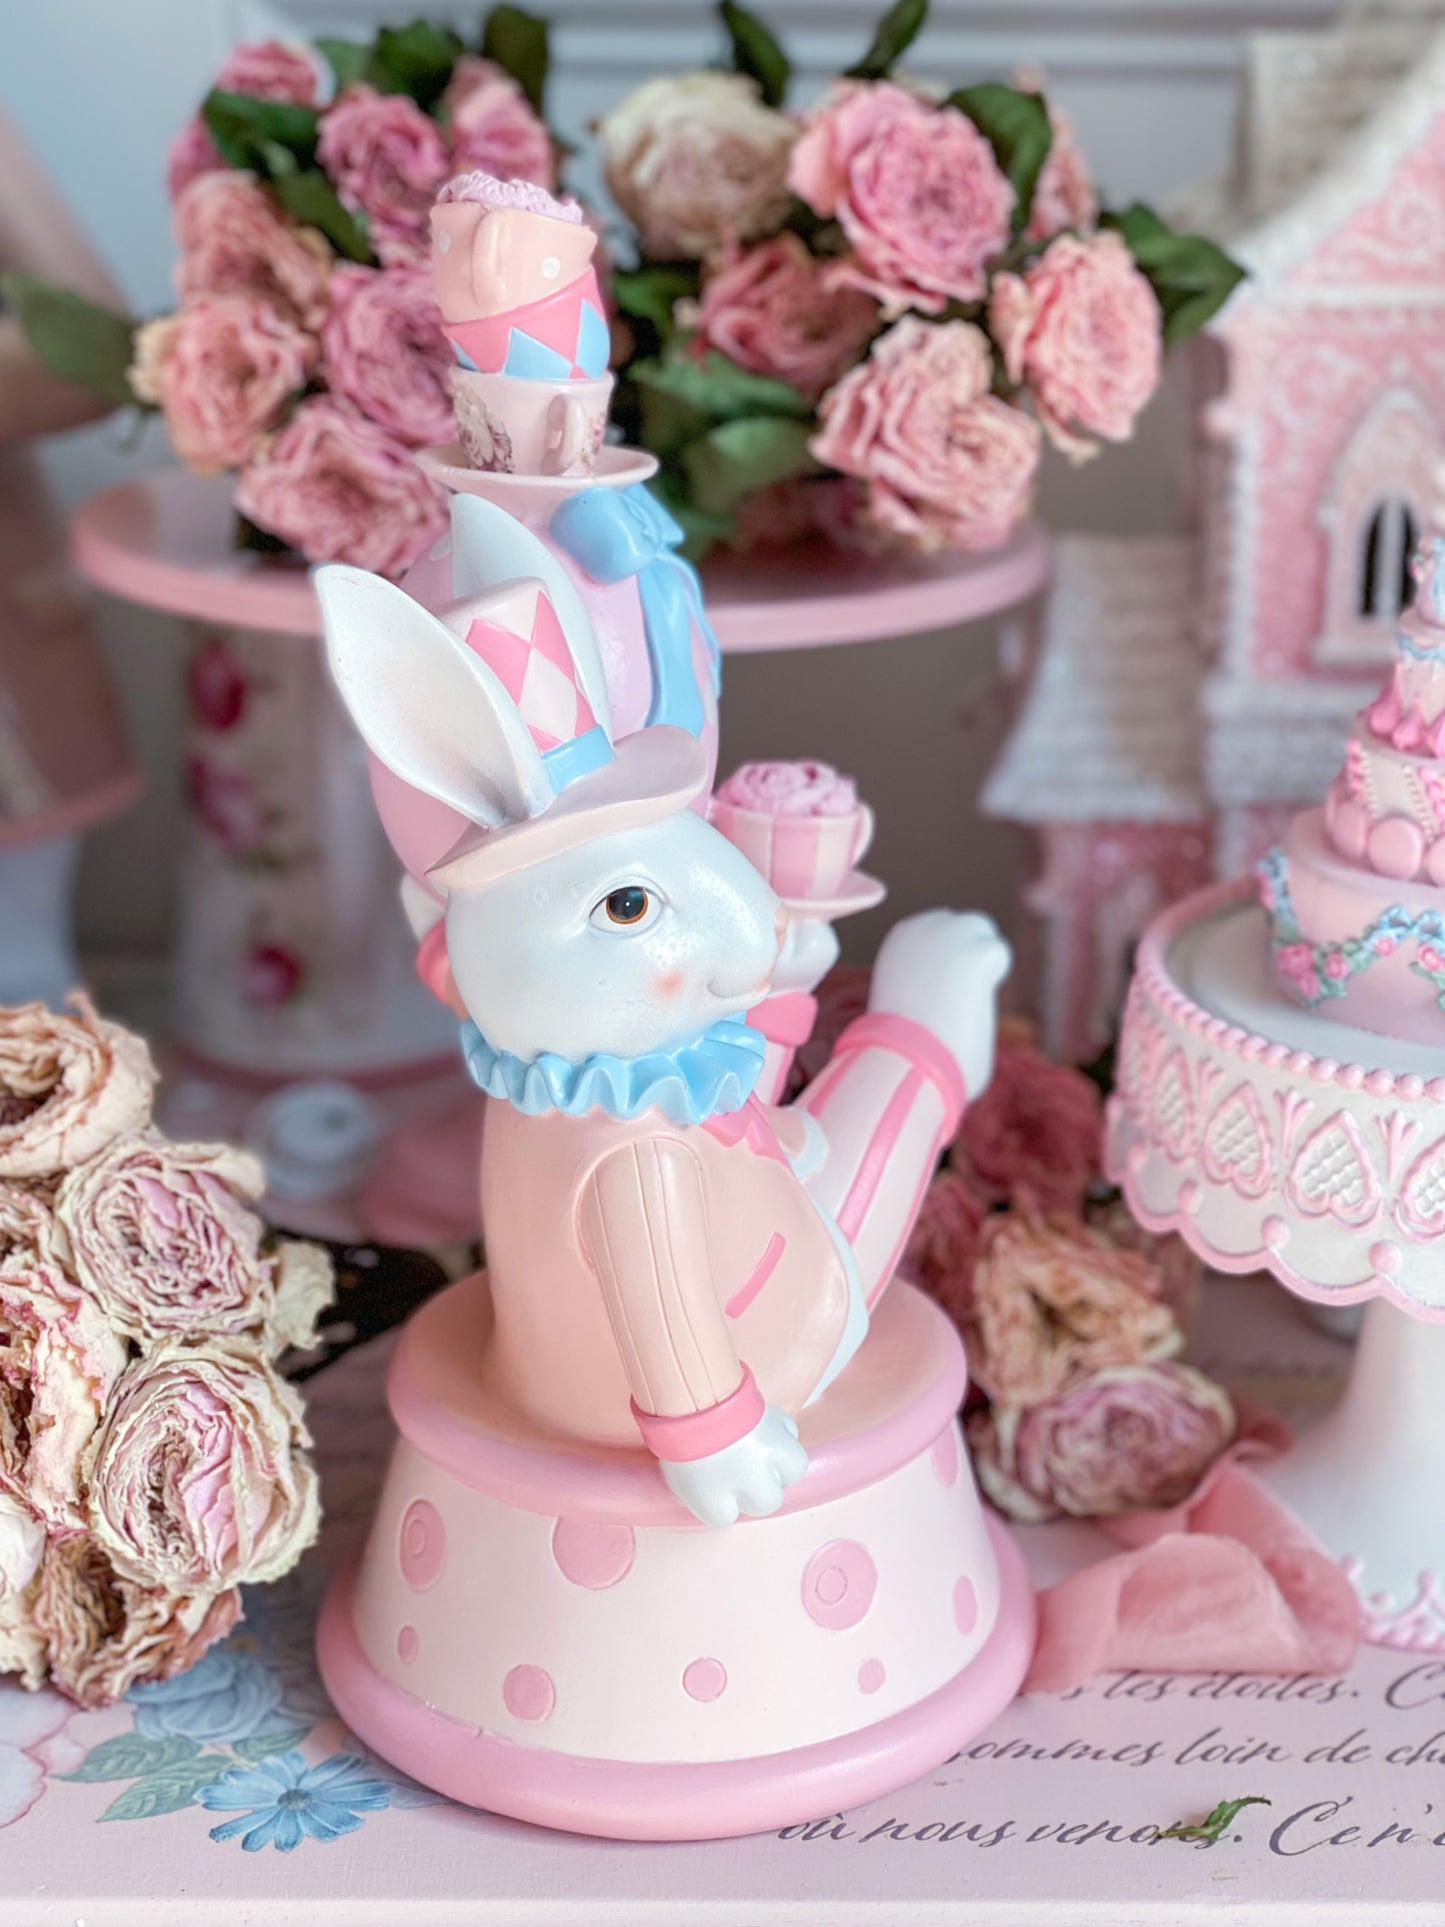 GLOW-UP COMMISSION: Bespoke Pastel Pink and Blue Mad Hatter Style Easter Bunny Balancing egg and Teacups Hand Painted